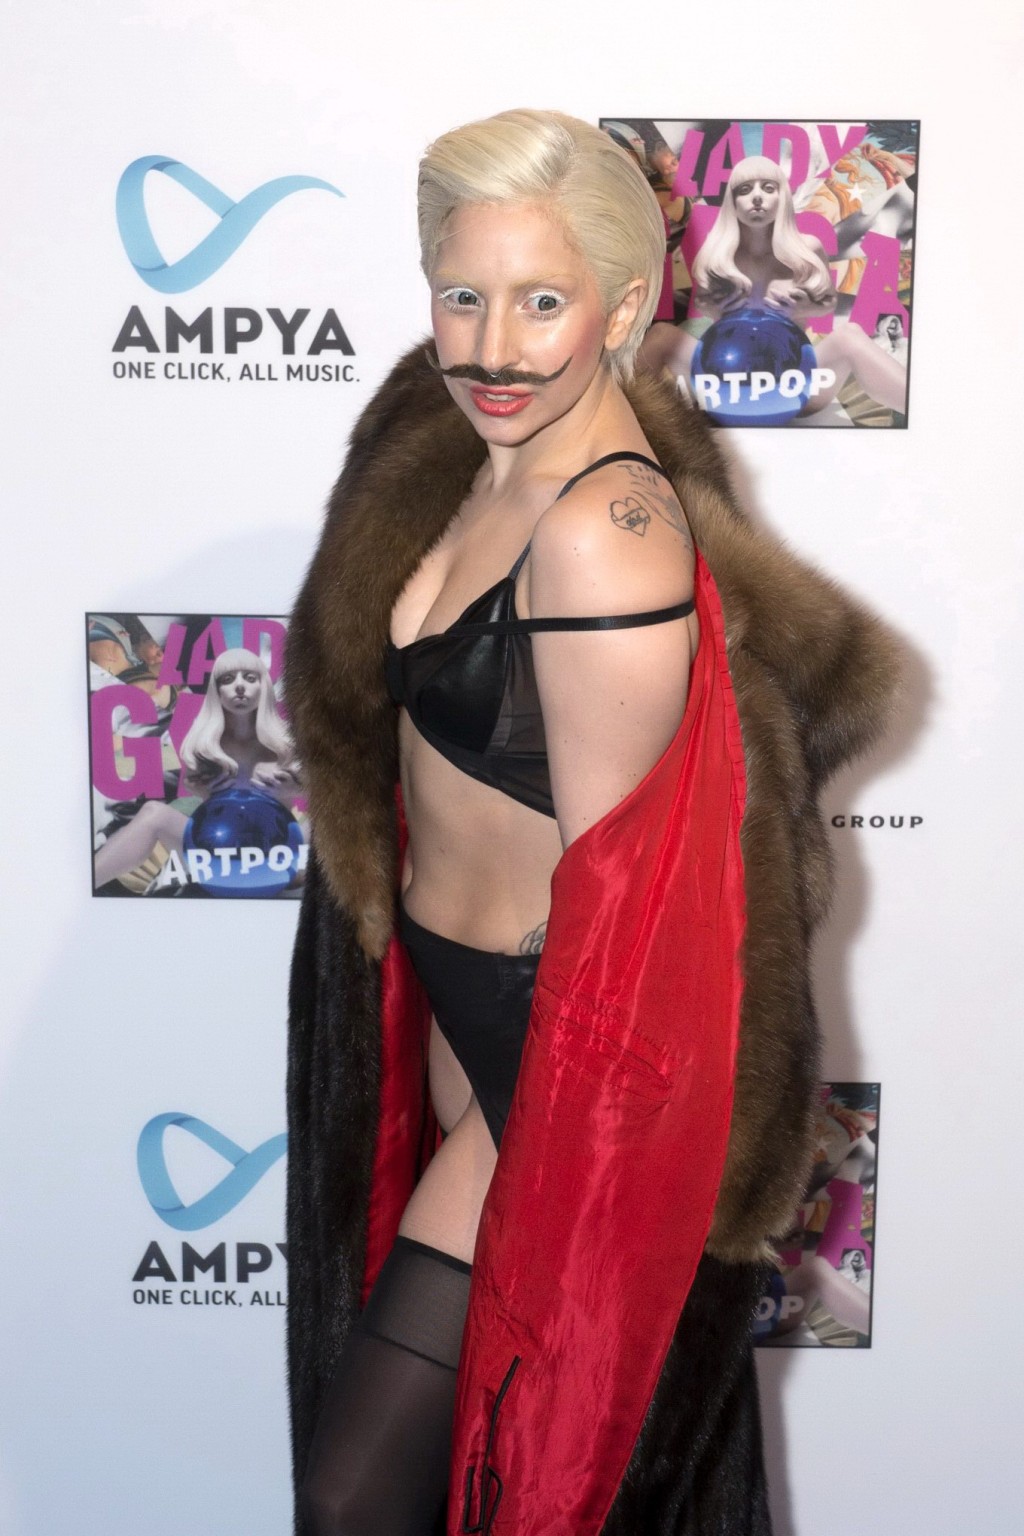 Lady Gaga wearing lingerie and fake moustache at her album promotion in Berlin #75215018